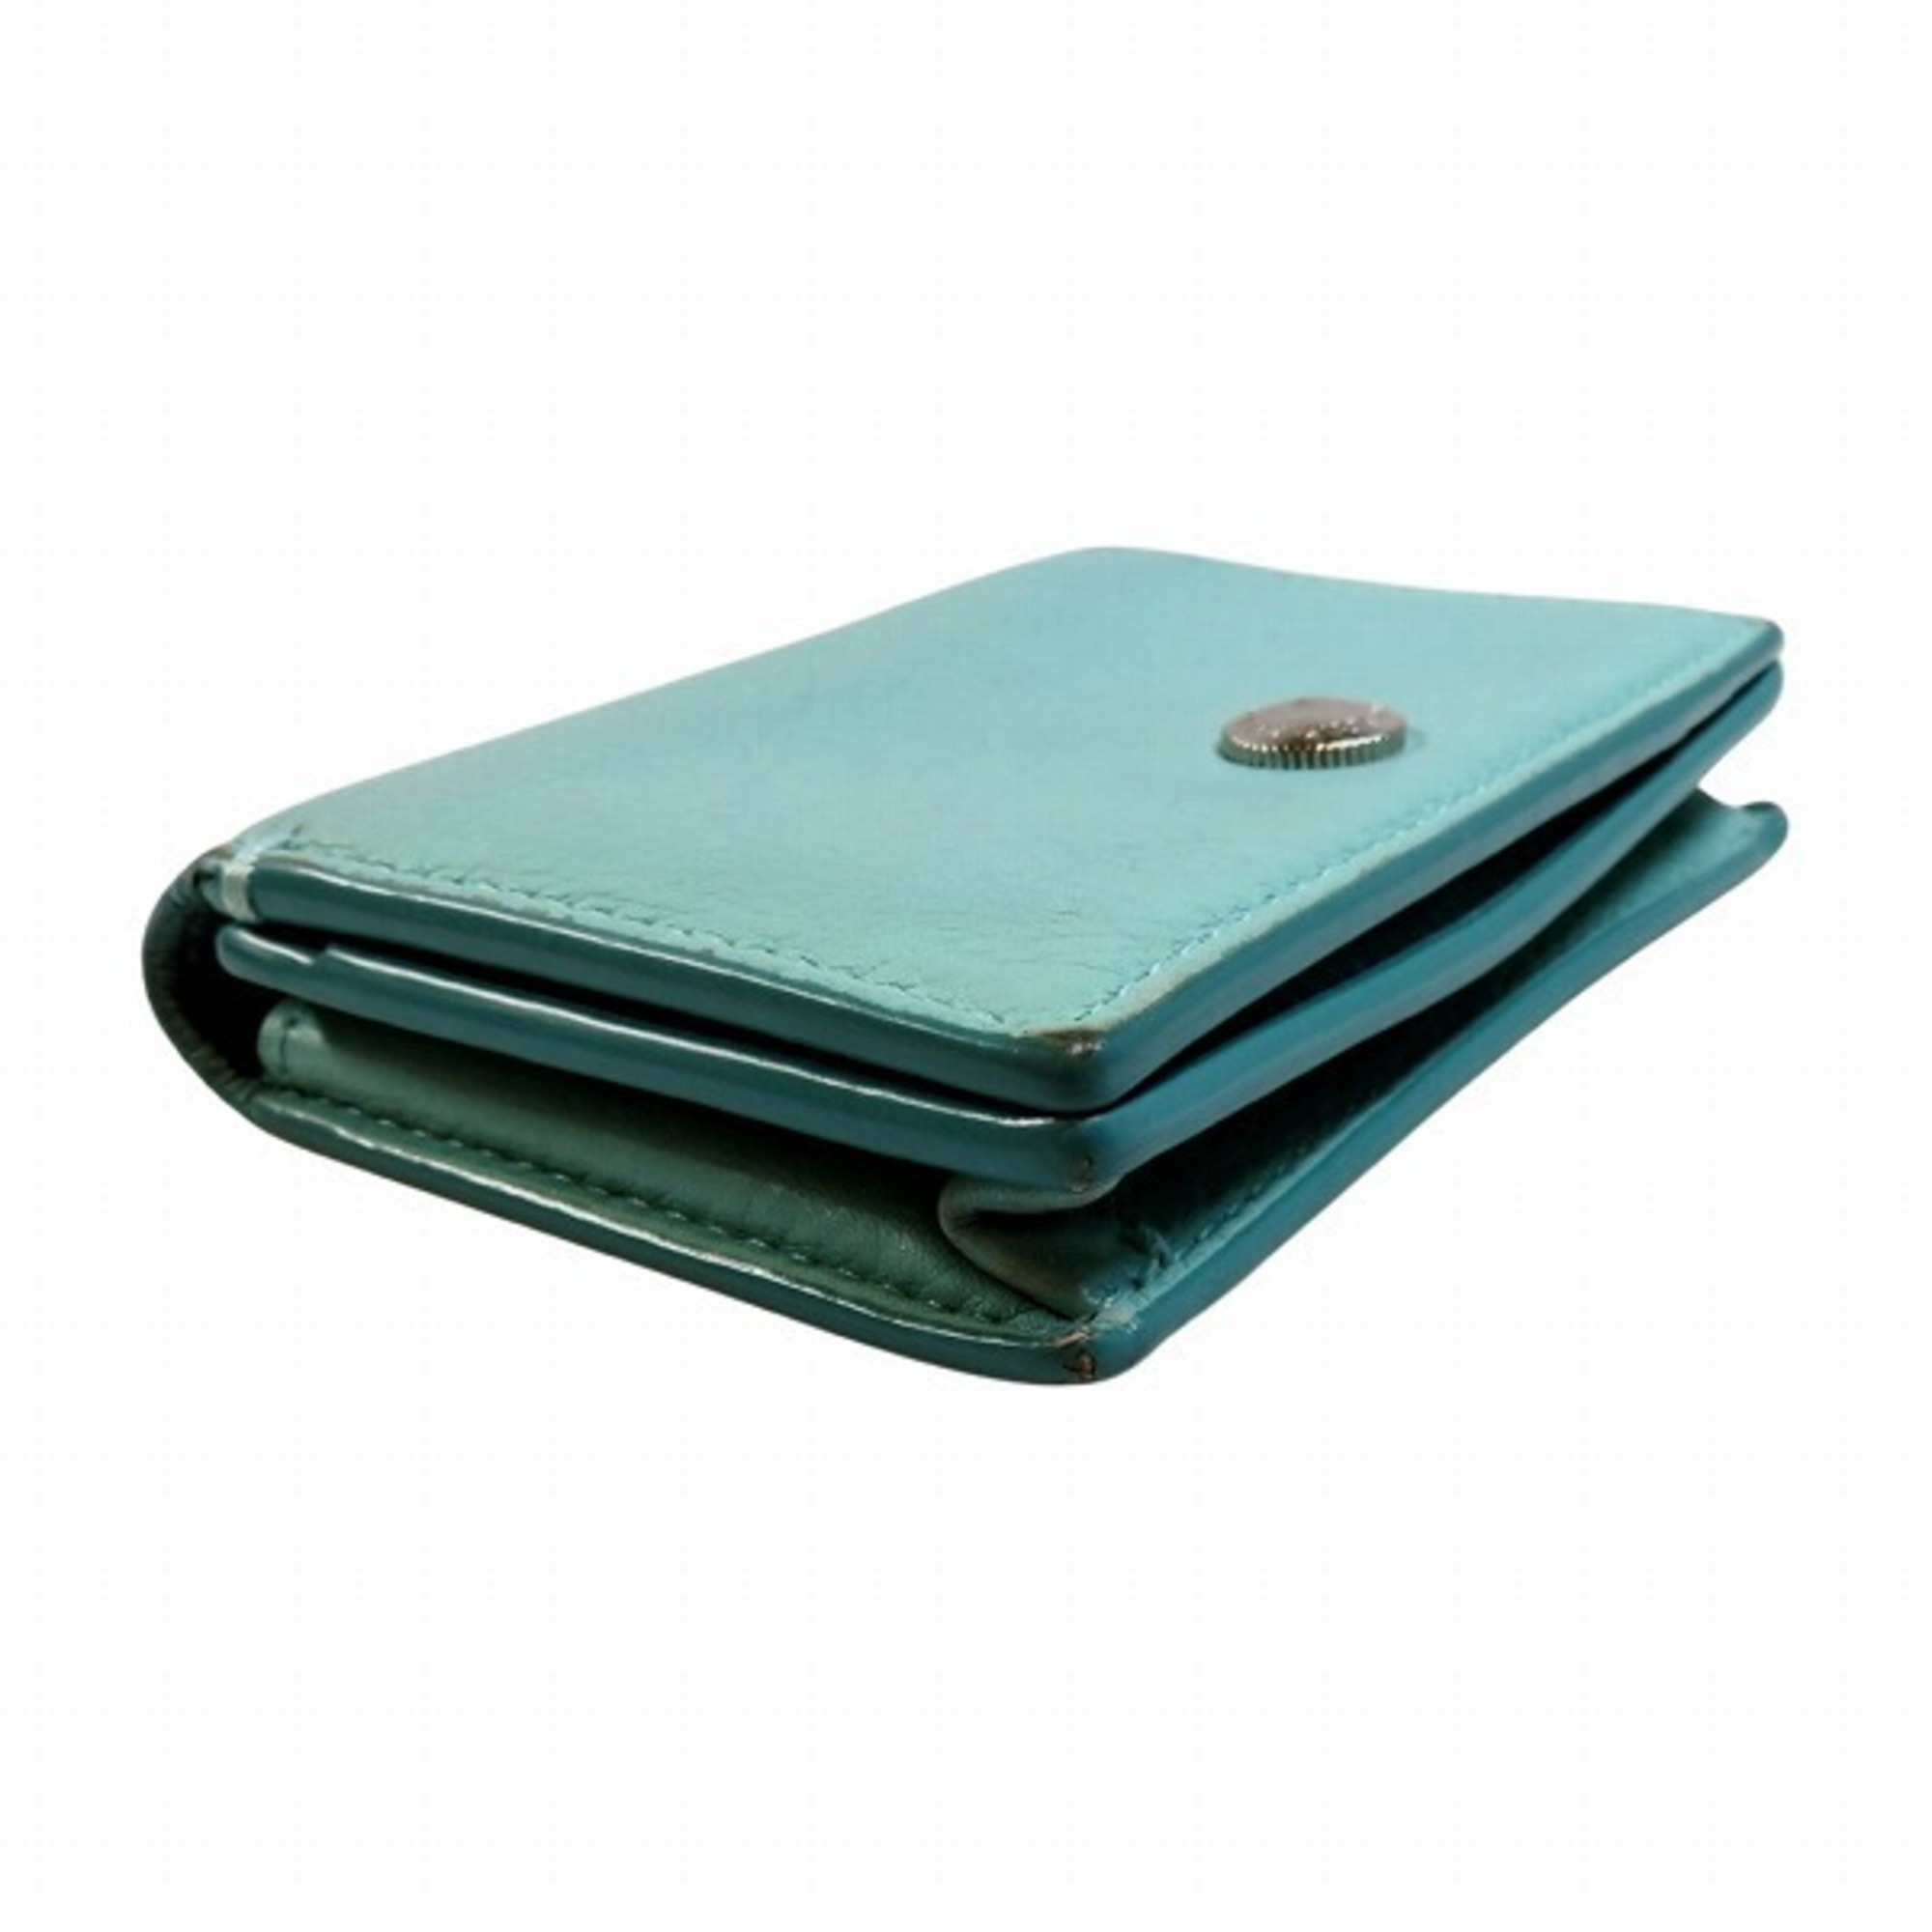 Tiffany Leather Blue Brand Accessories Card Case Business Holder Ladies